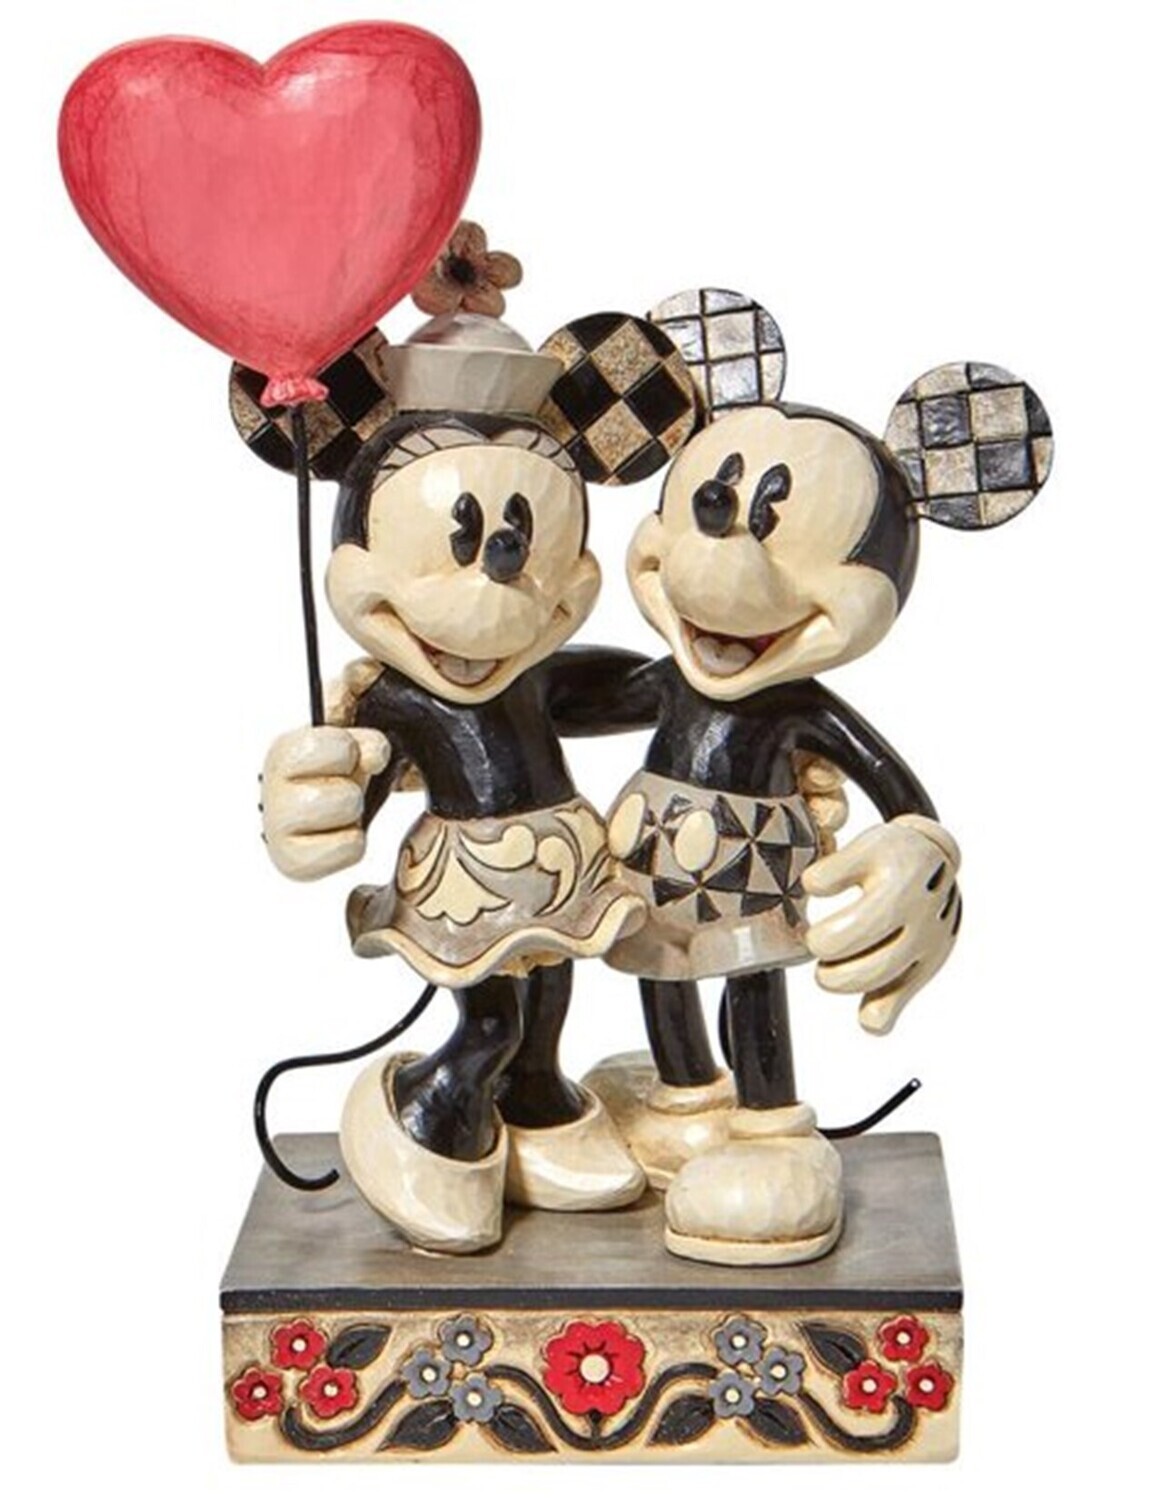 Jim Shore Disney Traditions "Love is in the Air" Mickey & Minnie Mouse Valentine Sweethearts (6010106)